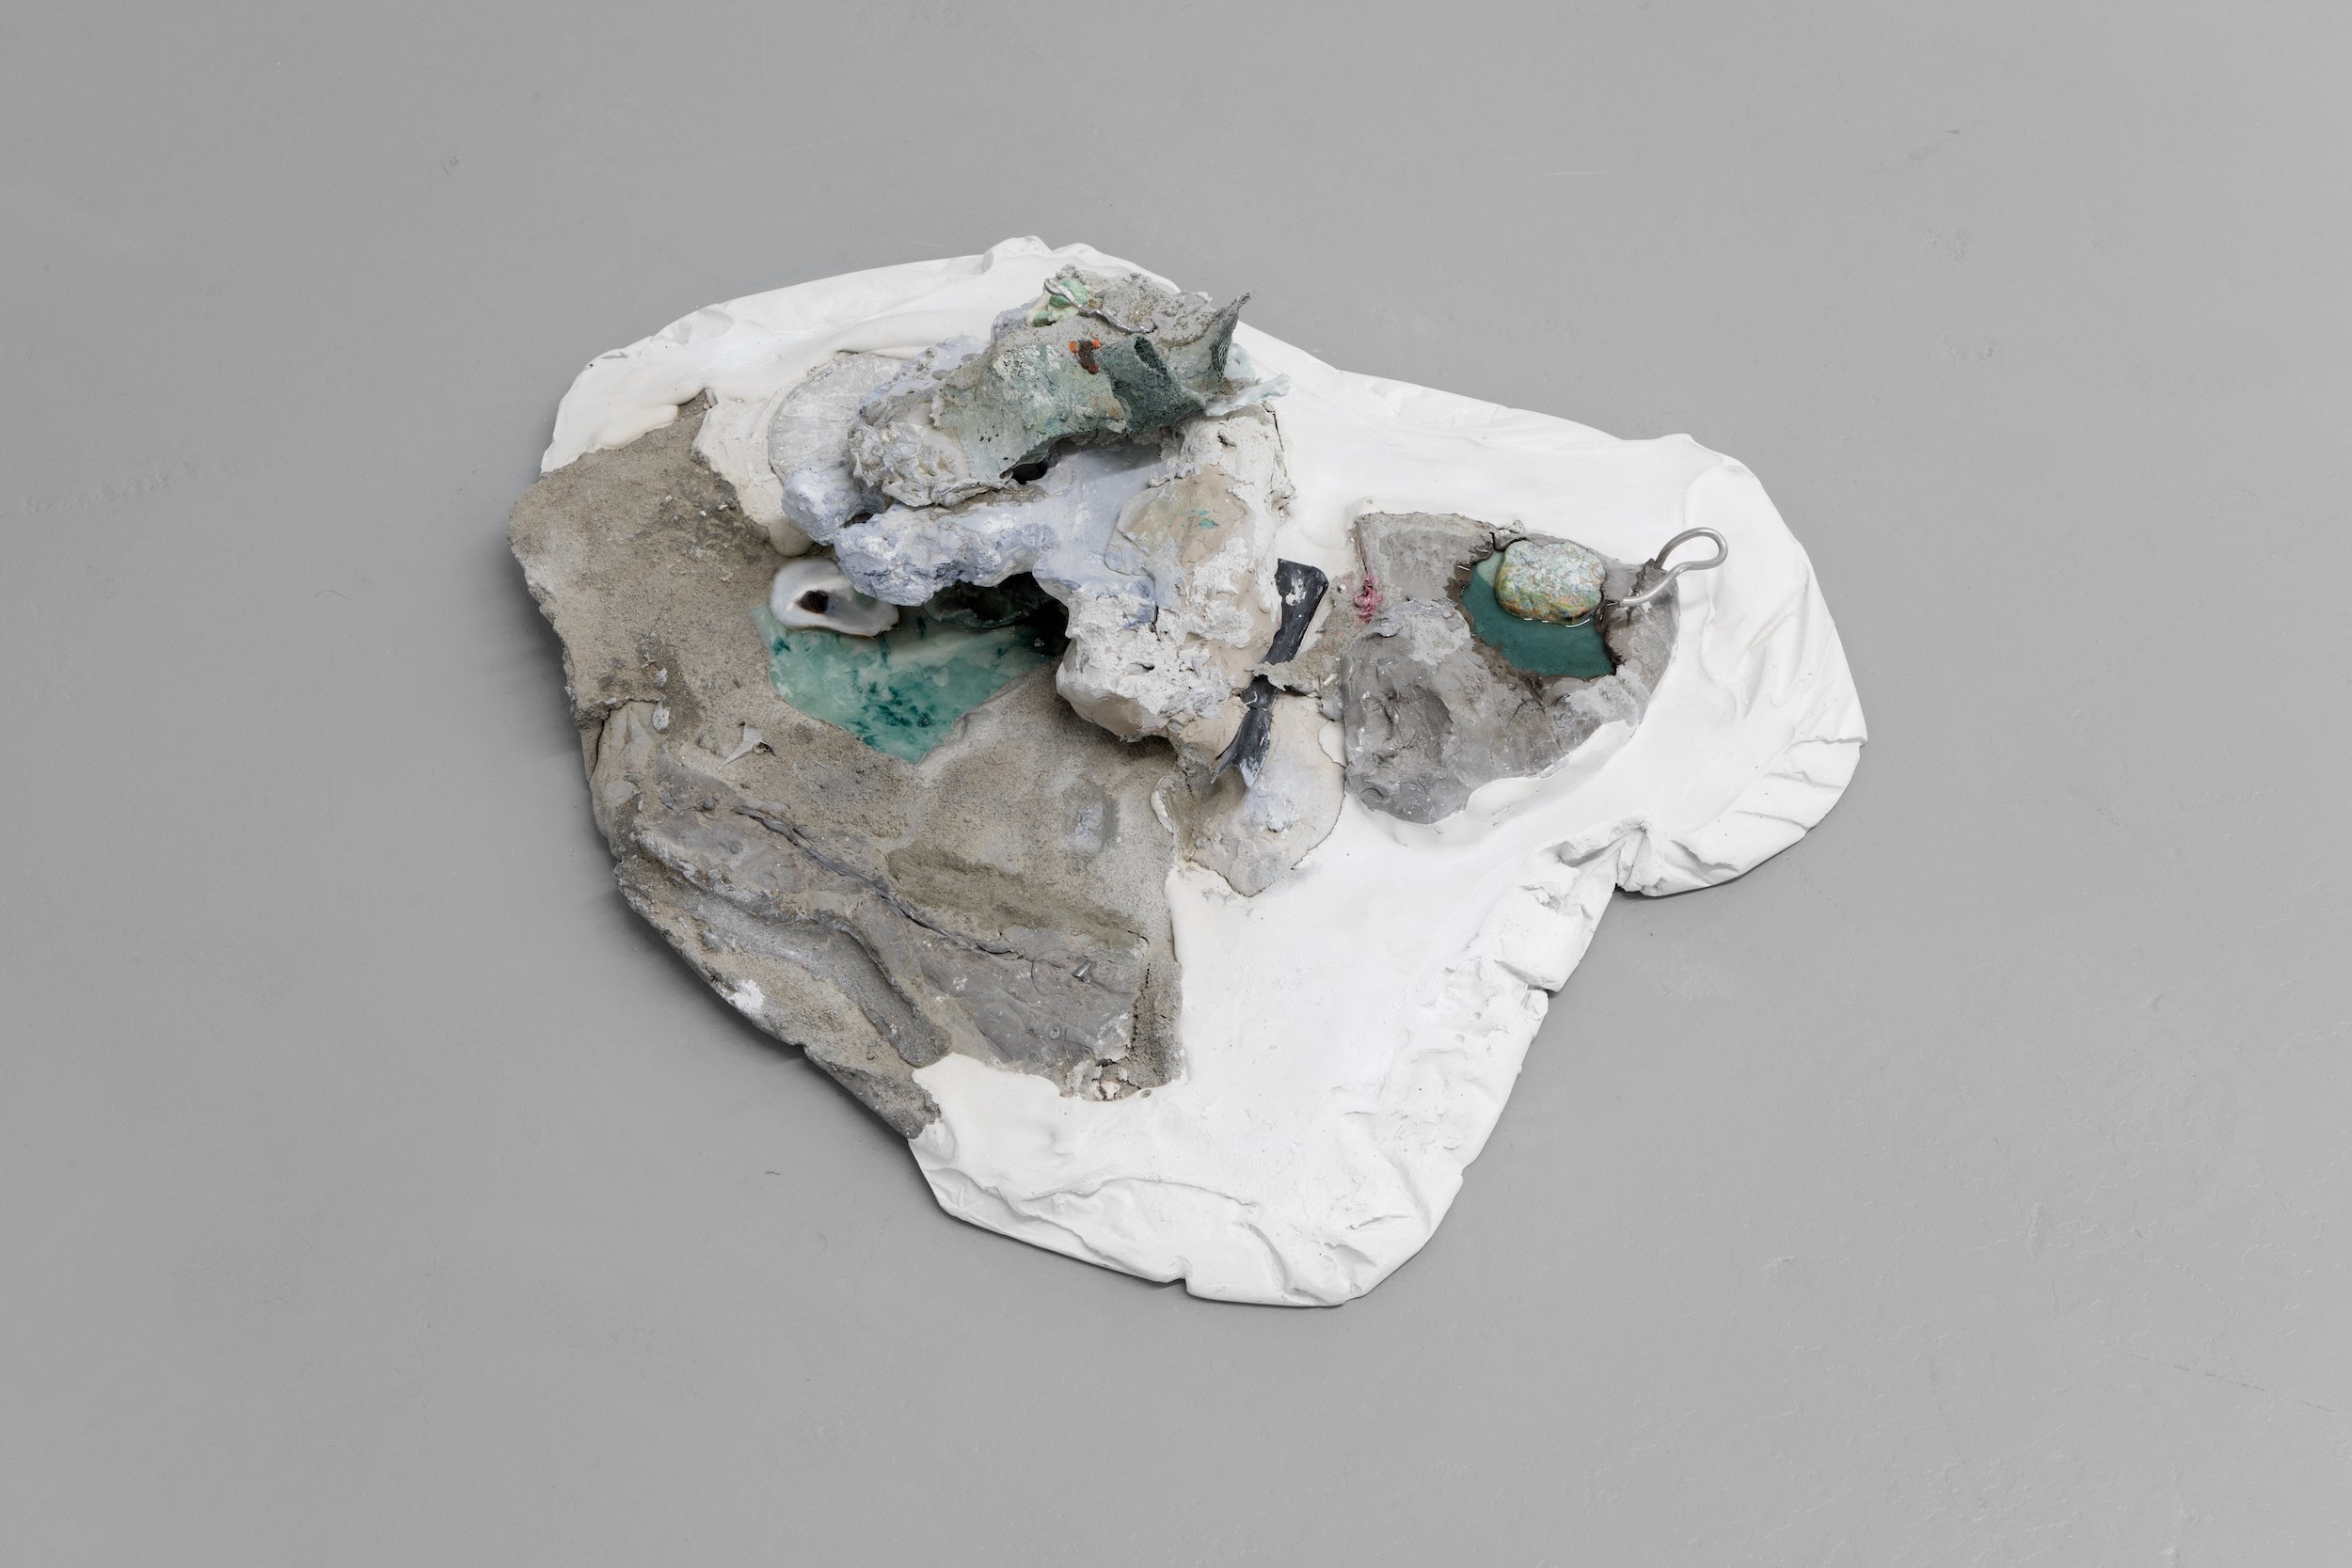  Laur P,  Before extraneous lines appeared on our chest , 2024, Plaster, concrete sand, dry pigments, solder metal, unfired clay, oil paint residues, drywall tape, aluminum foil pan, piece of plastic, ice melter salt, metal wire, oyster shell, concre